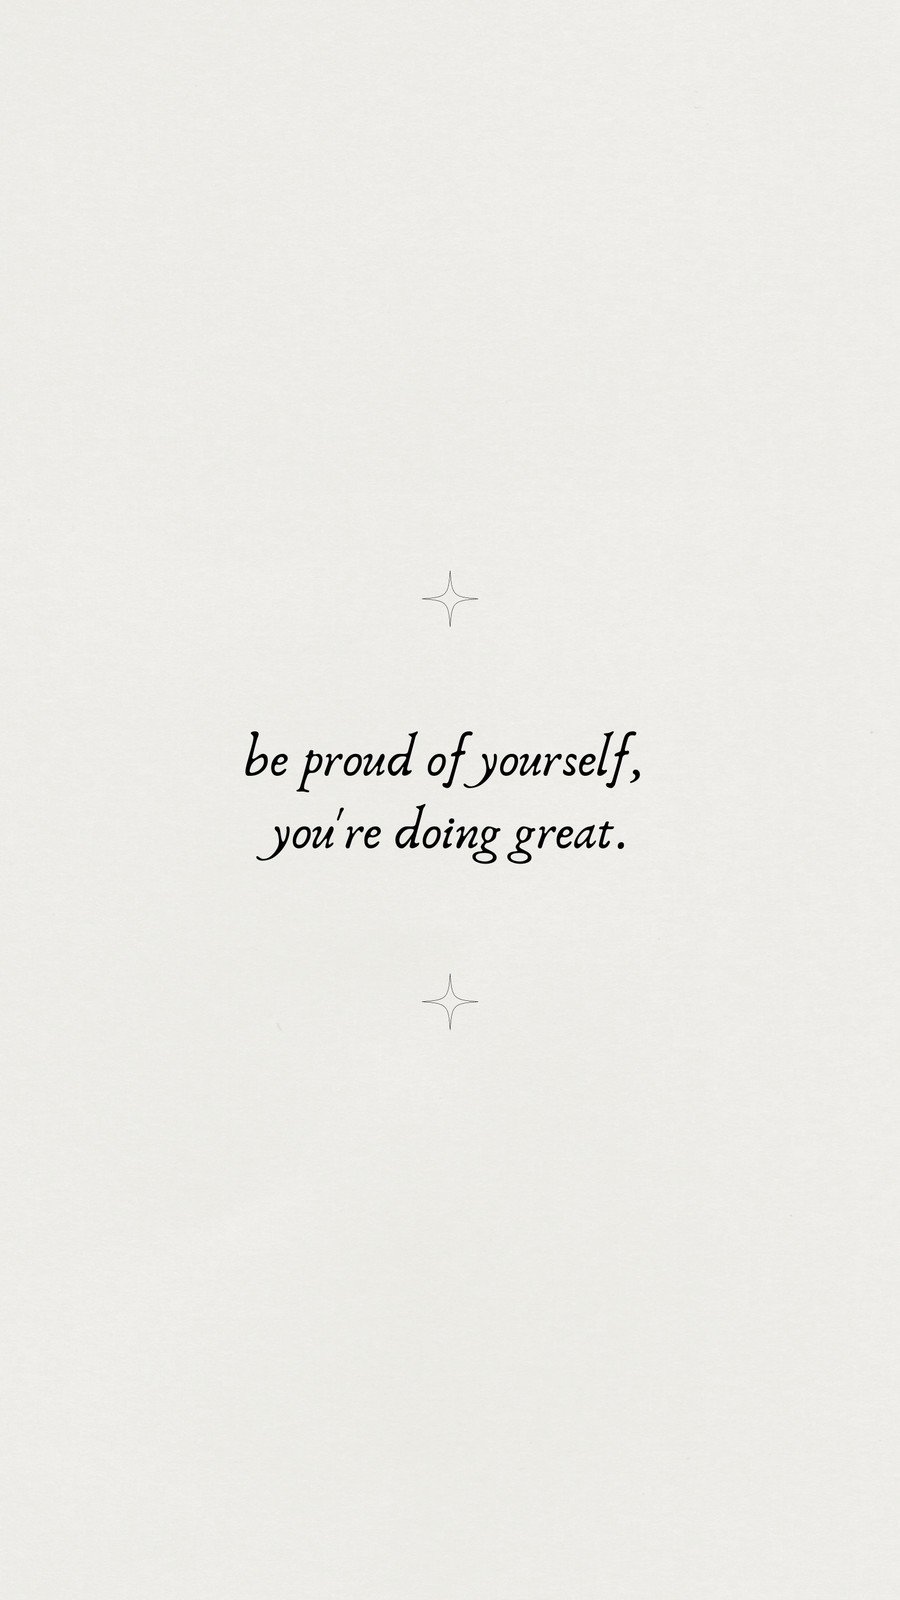 Be proud of yourself you are doing great - Black quotes